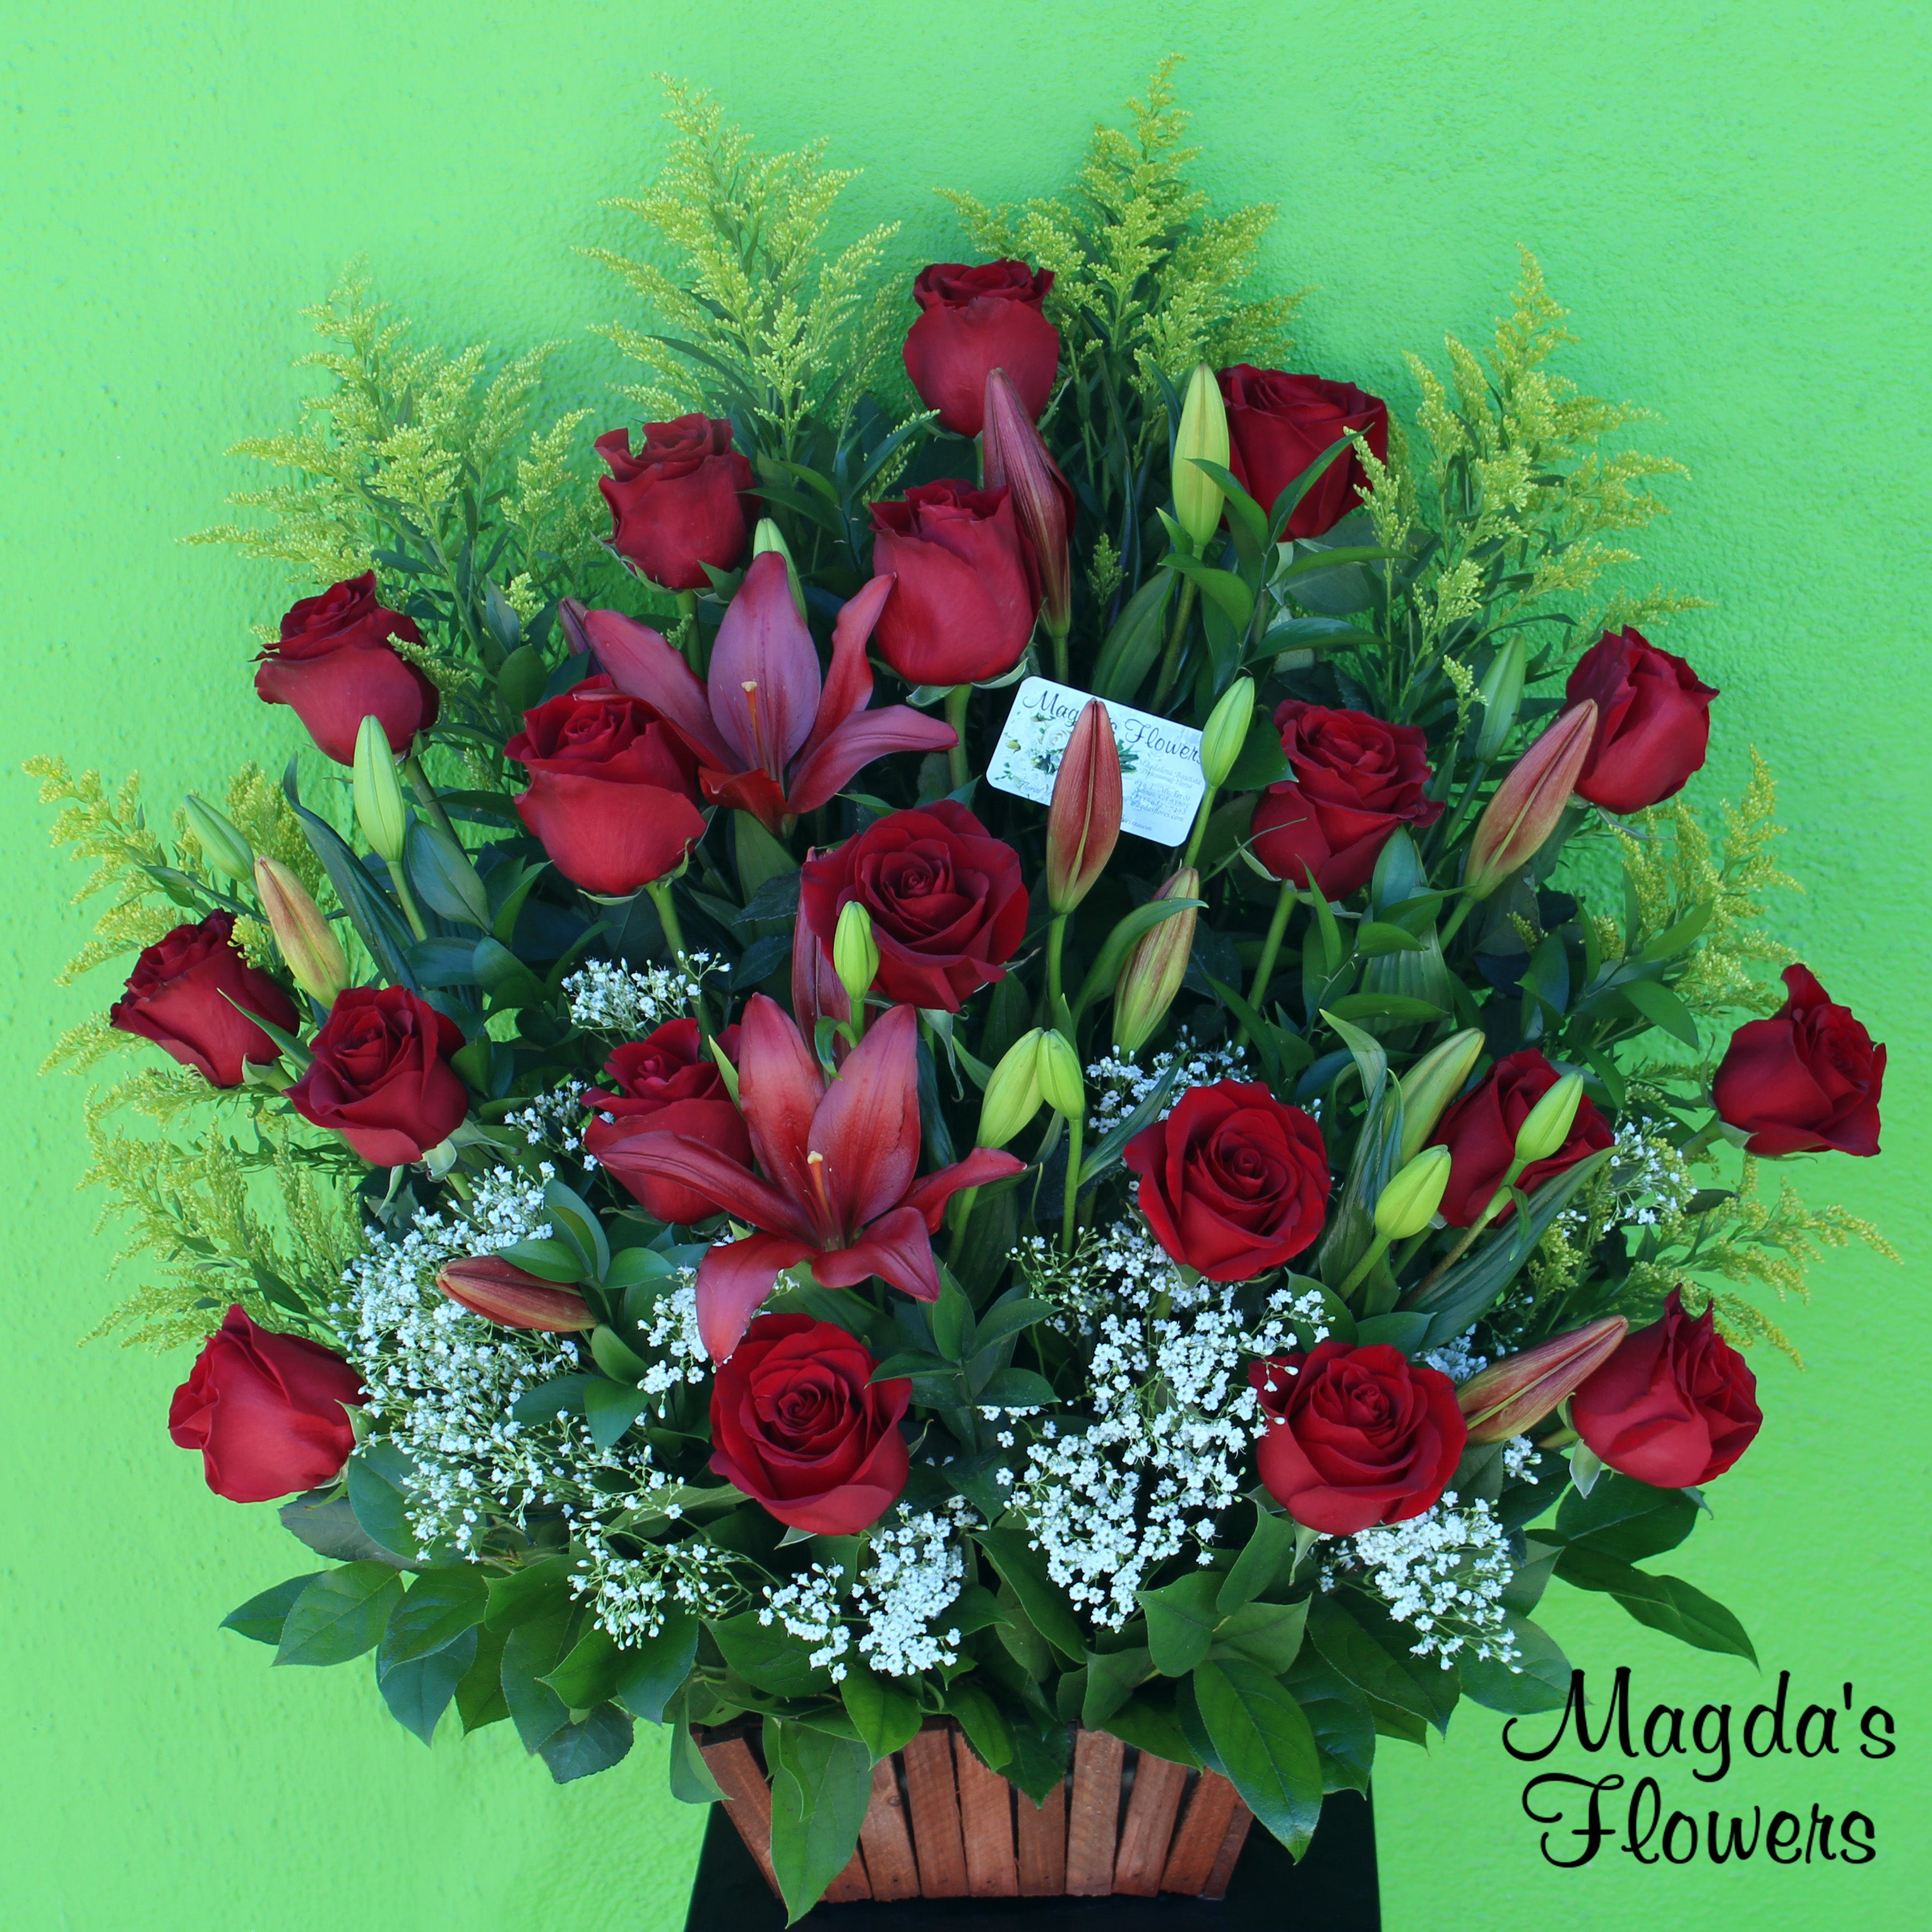 Romantic Basket - Show your love and affection with this stunning red rose basket, featuring a mix of passionate red roses and lush lilies. The perfect gift for Valentine's Day, anniversaries, or any occasion that calls for a romantic gesture.